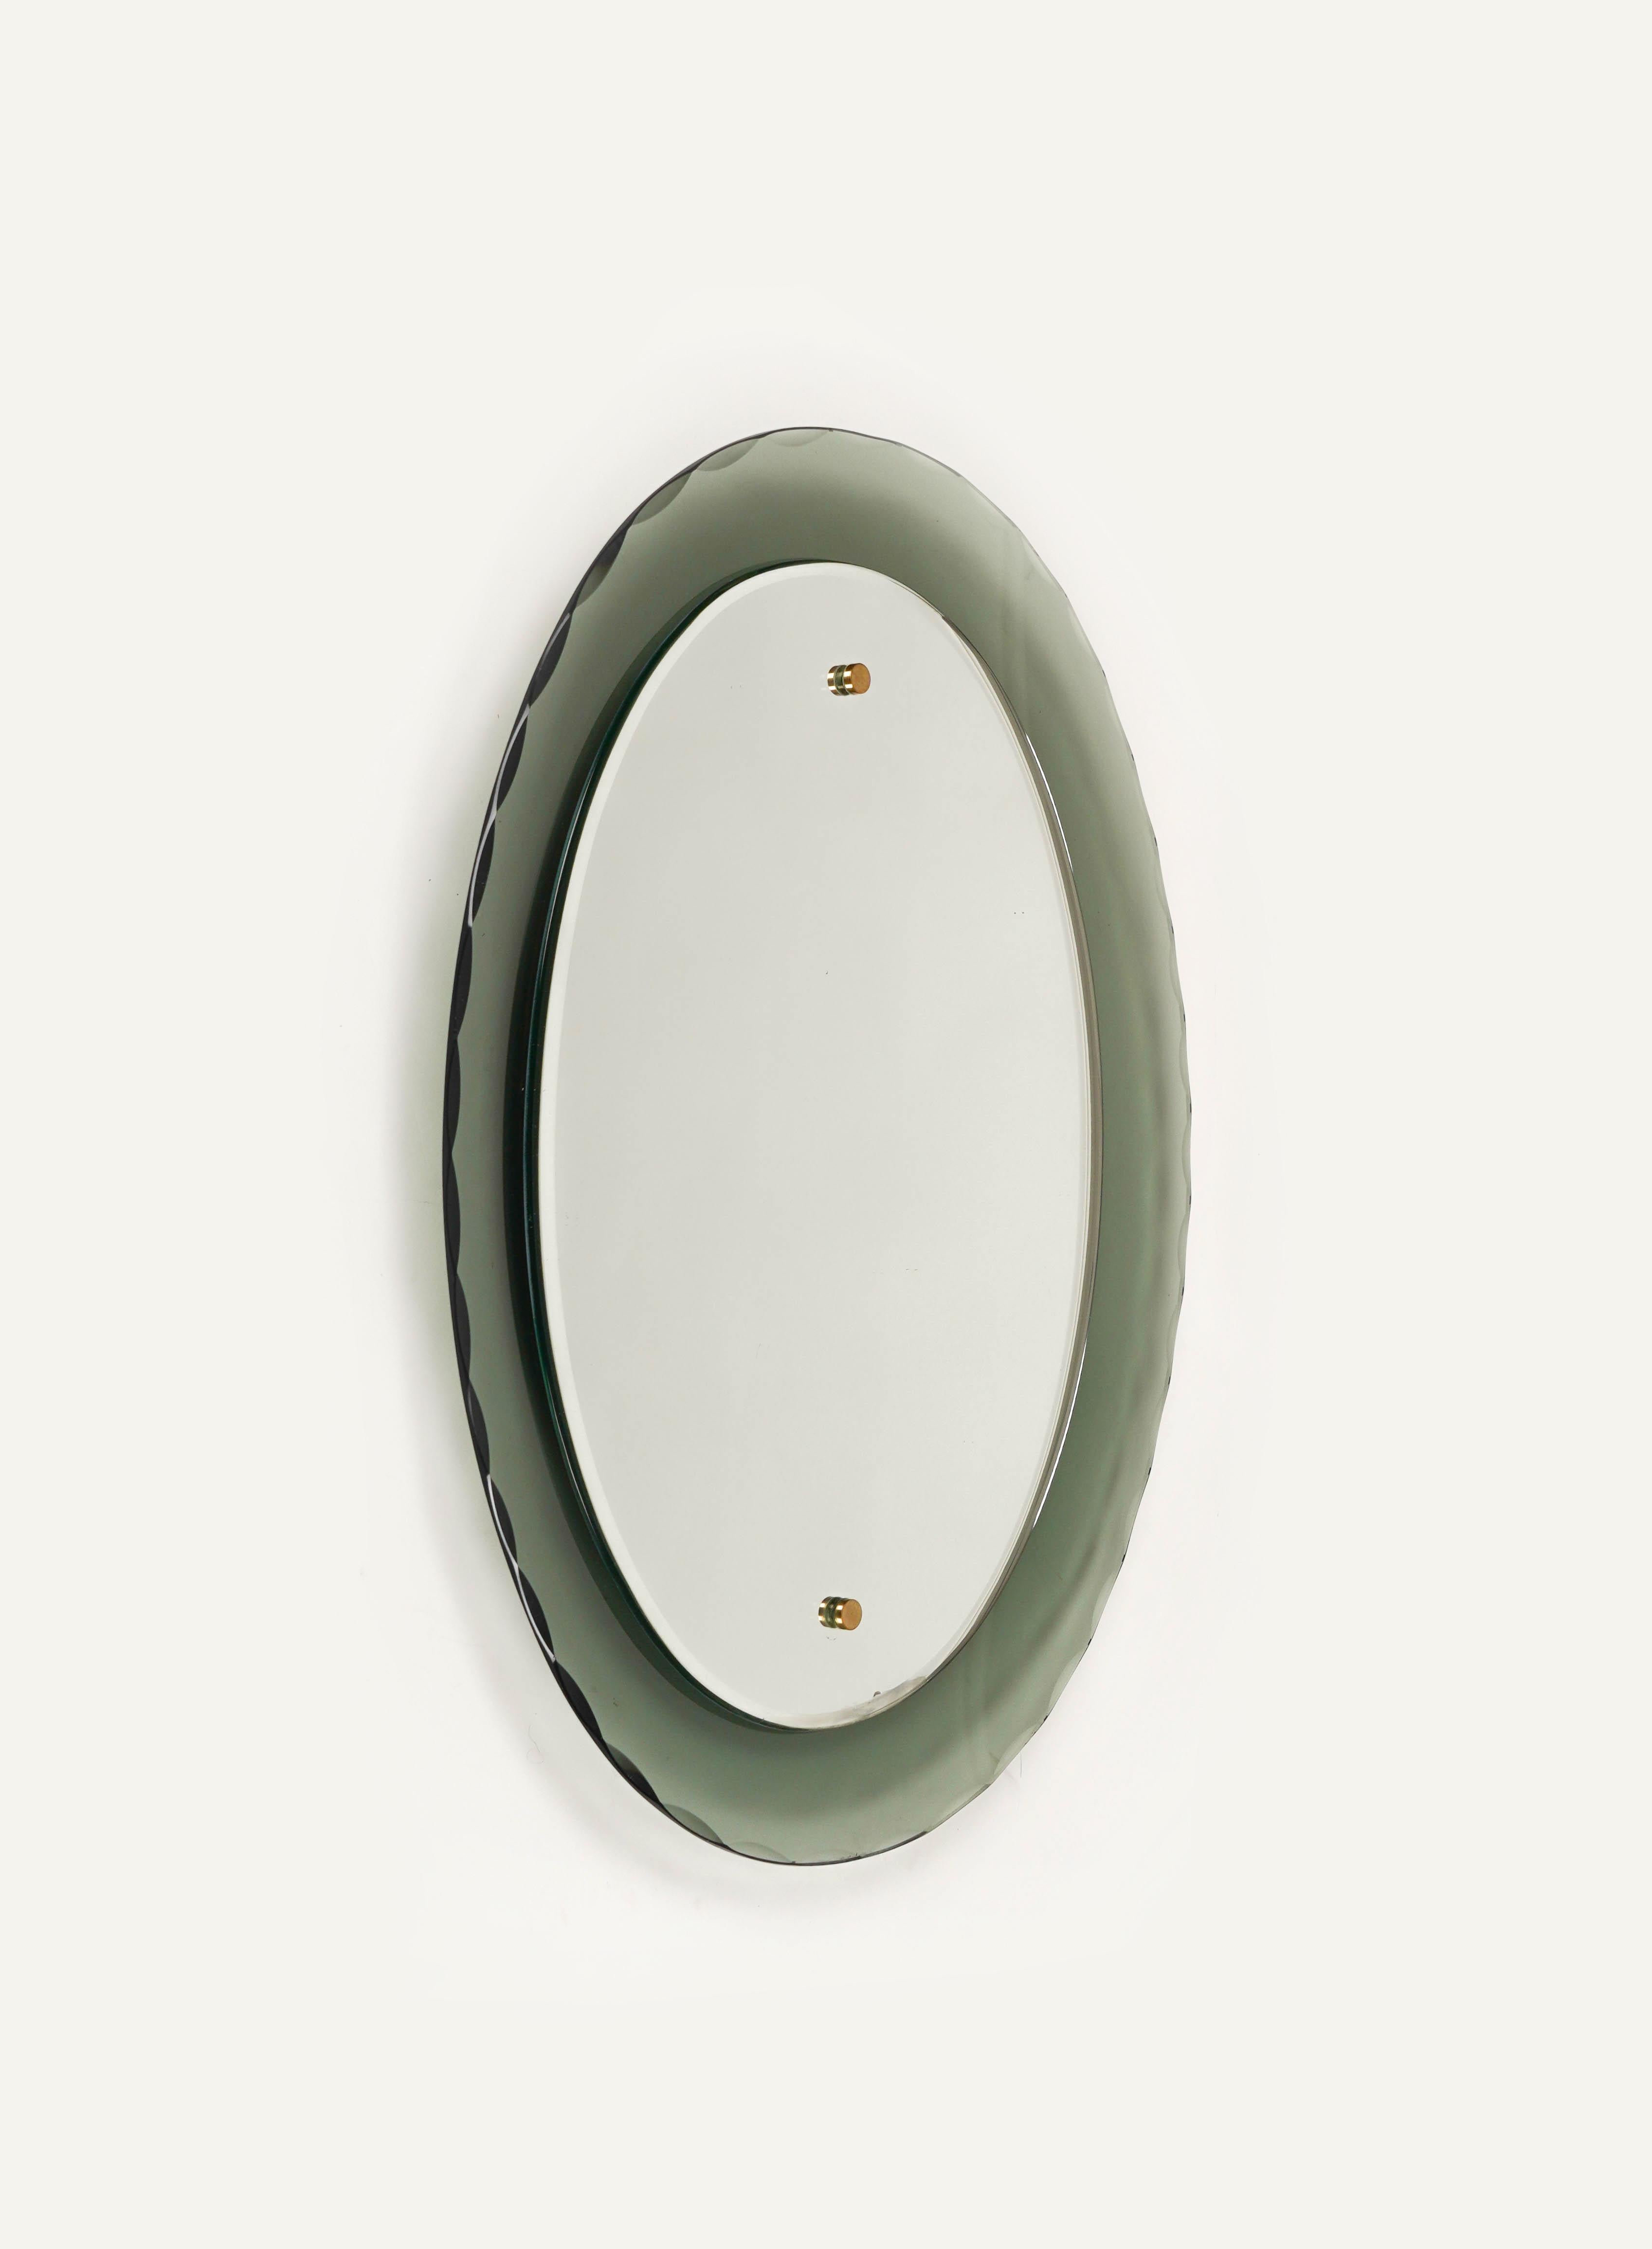 Midcentury Oval Wall Mirror whit Smoked Glass Frame by Cristal Arte, Italy 1960s In Good Condition For Sale In Rome, IT